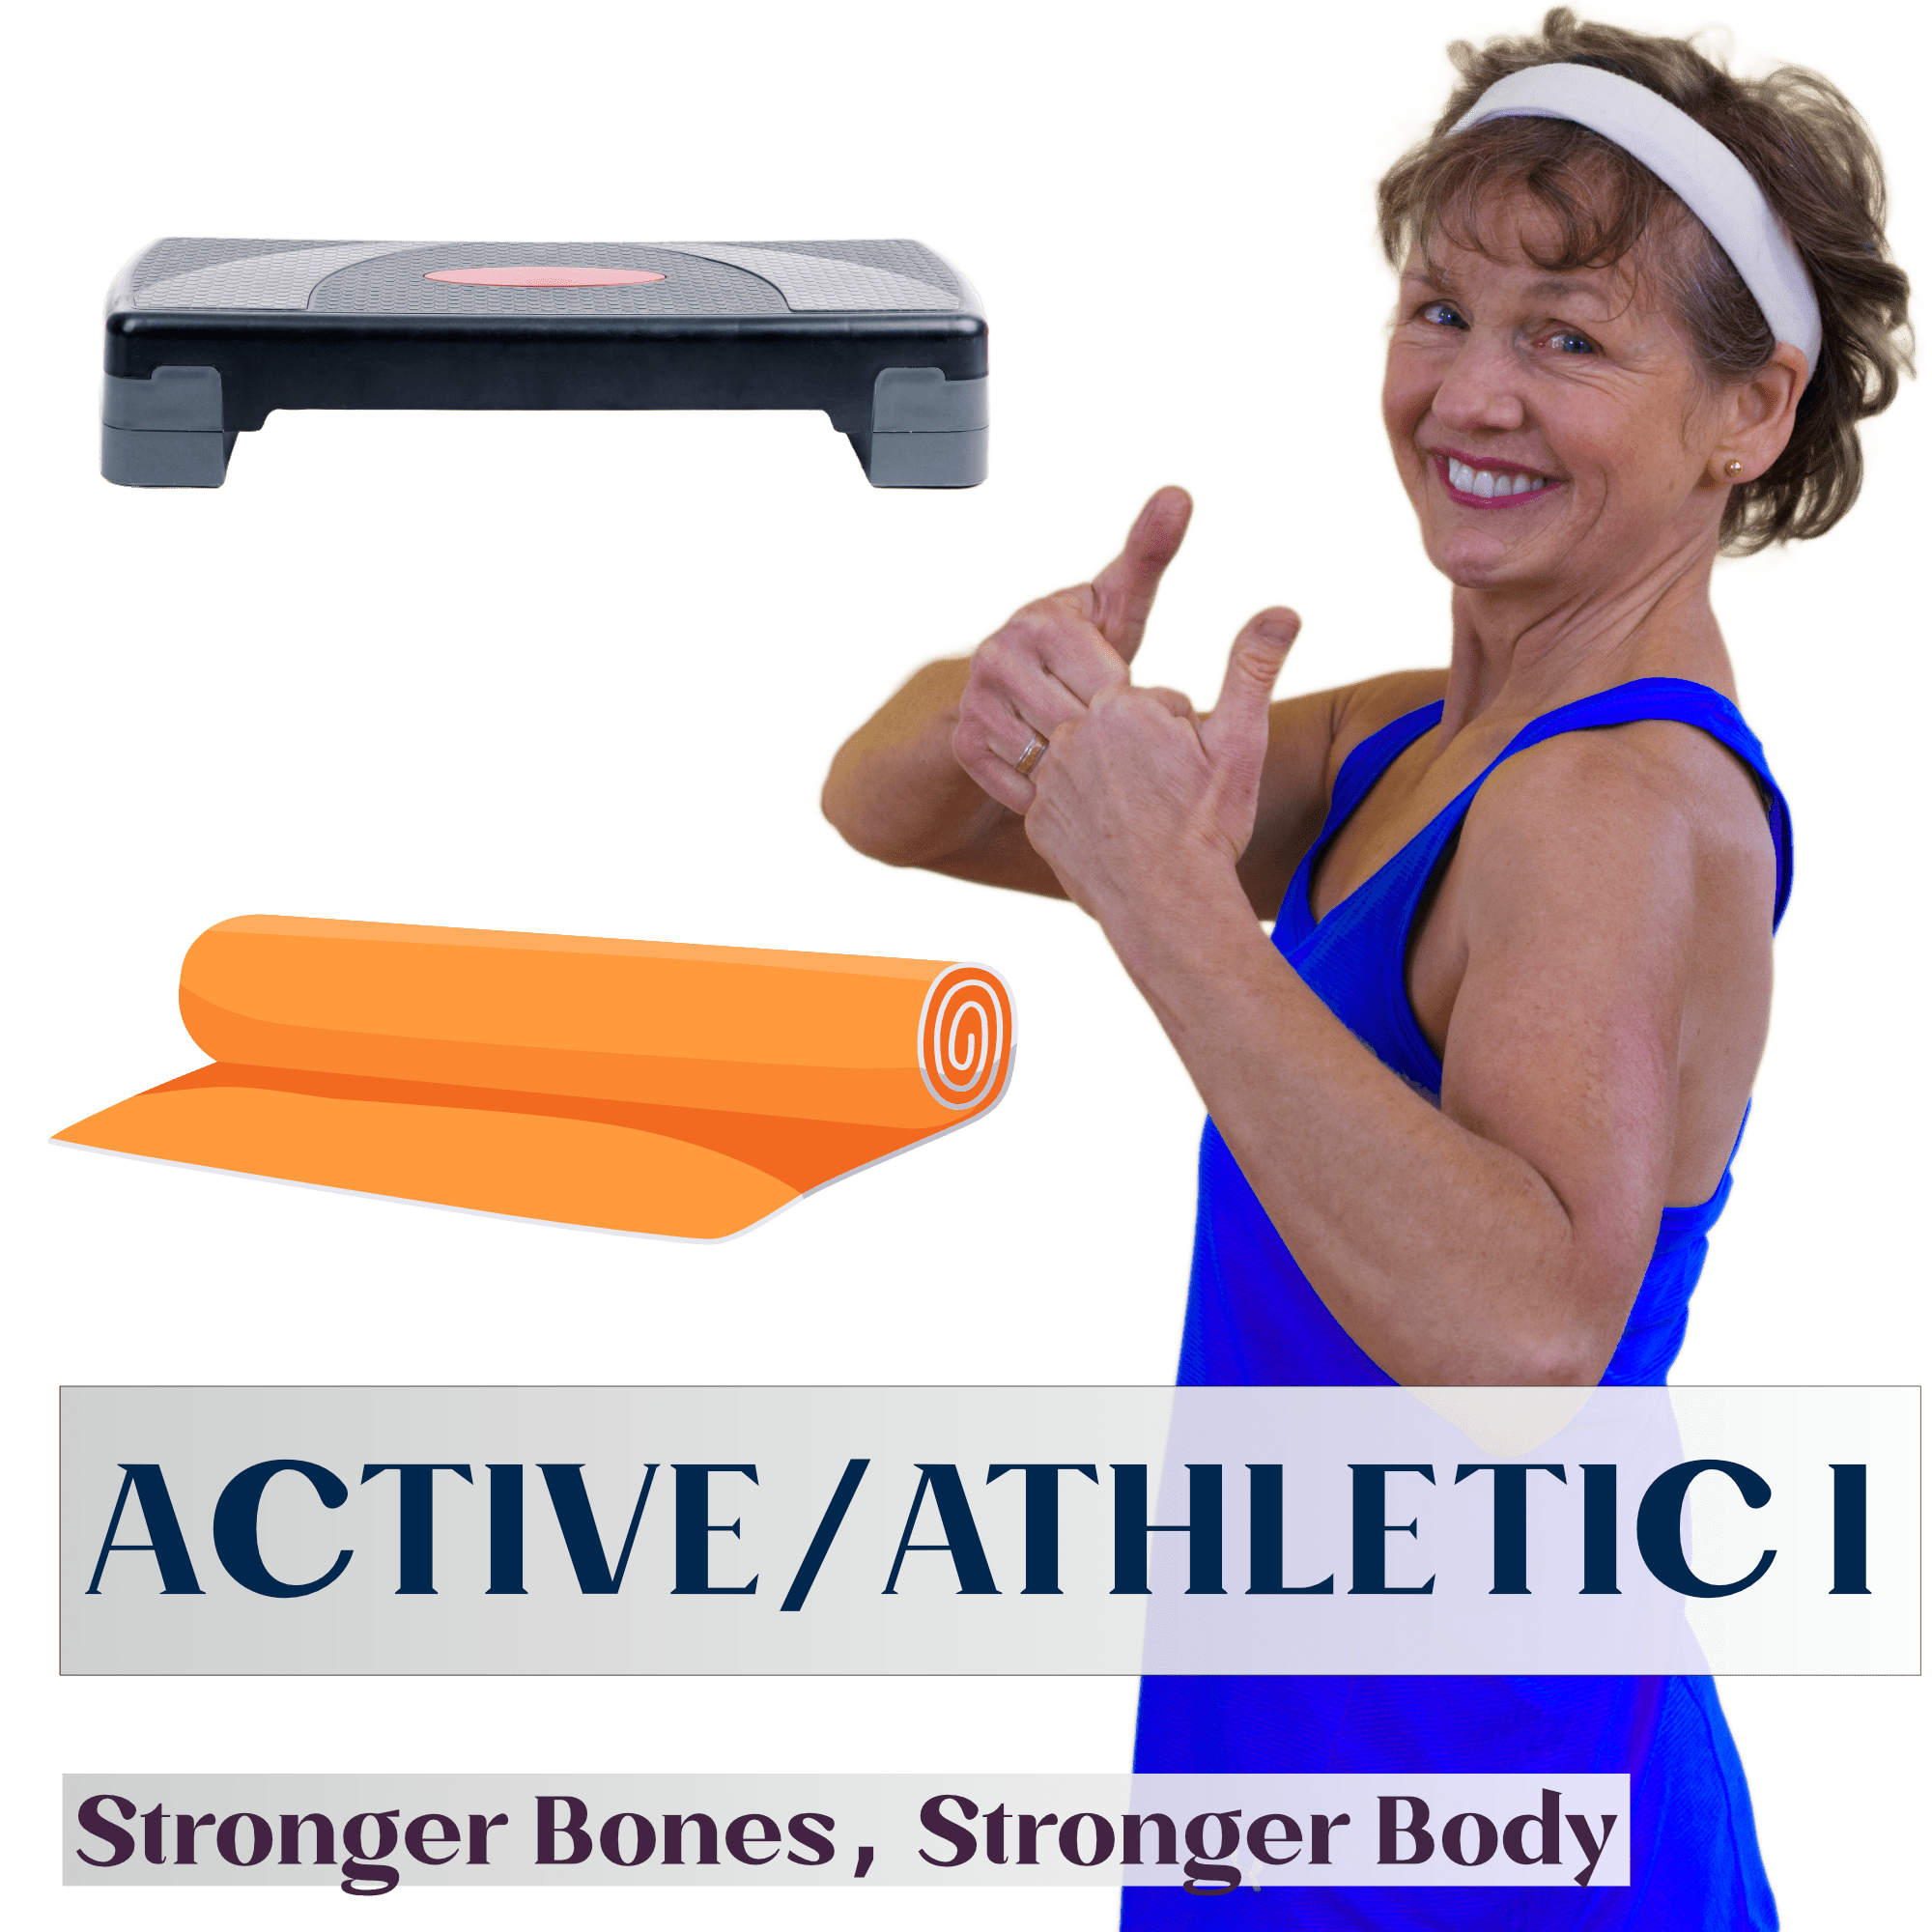 osteoporosis exercise equipment for active/athletic I video